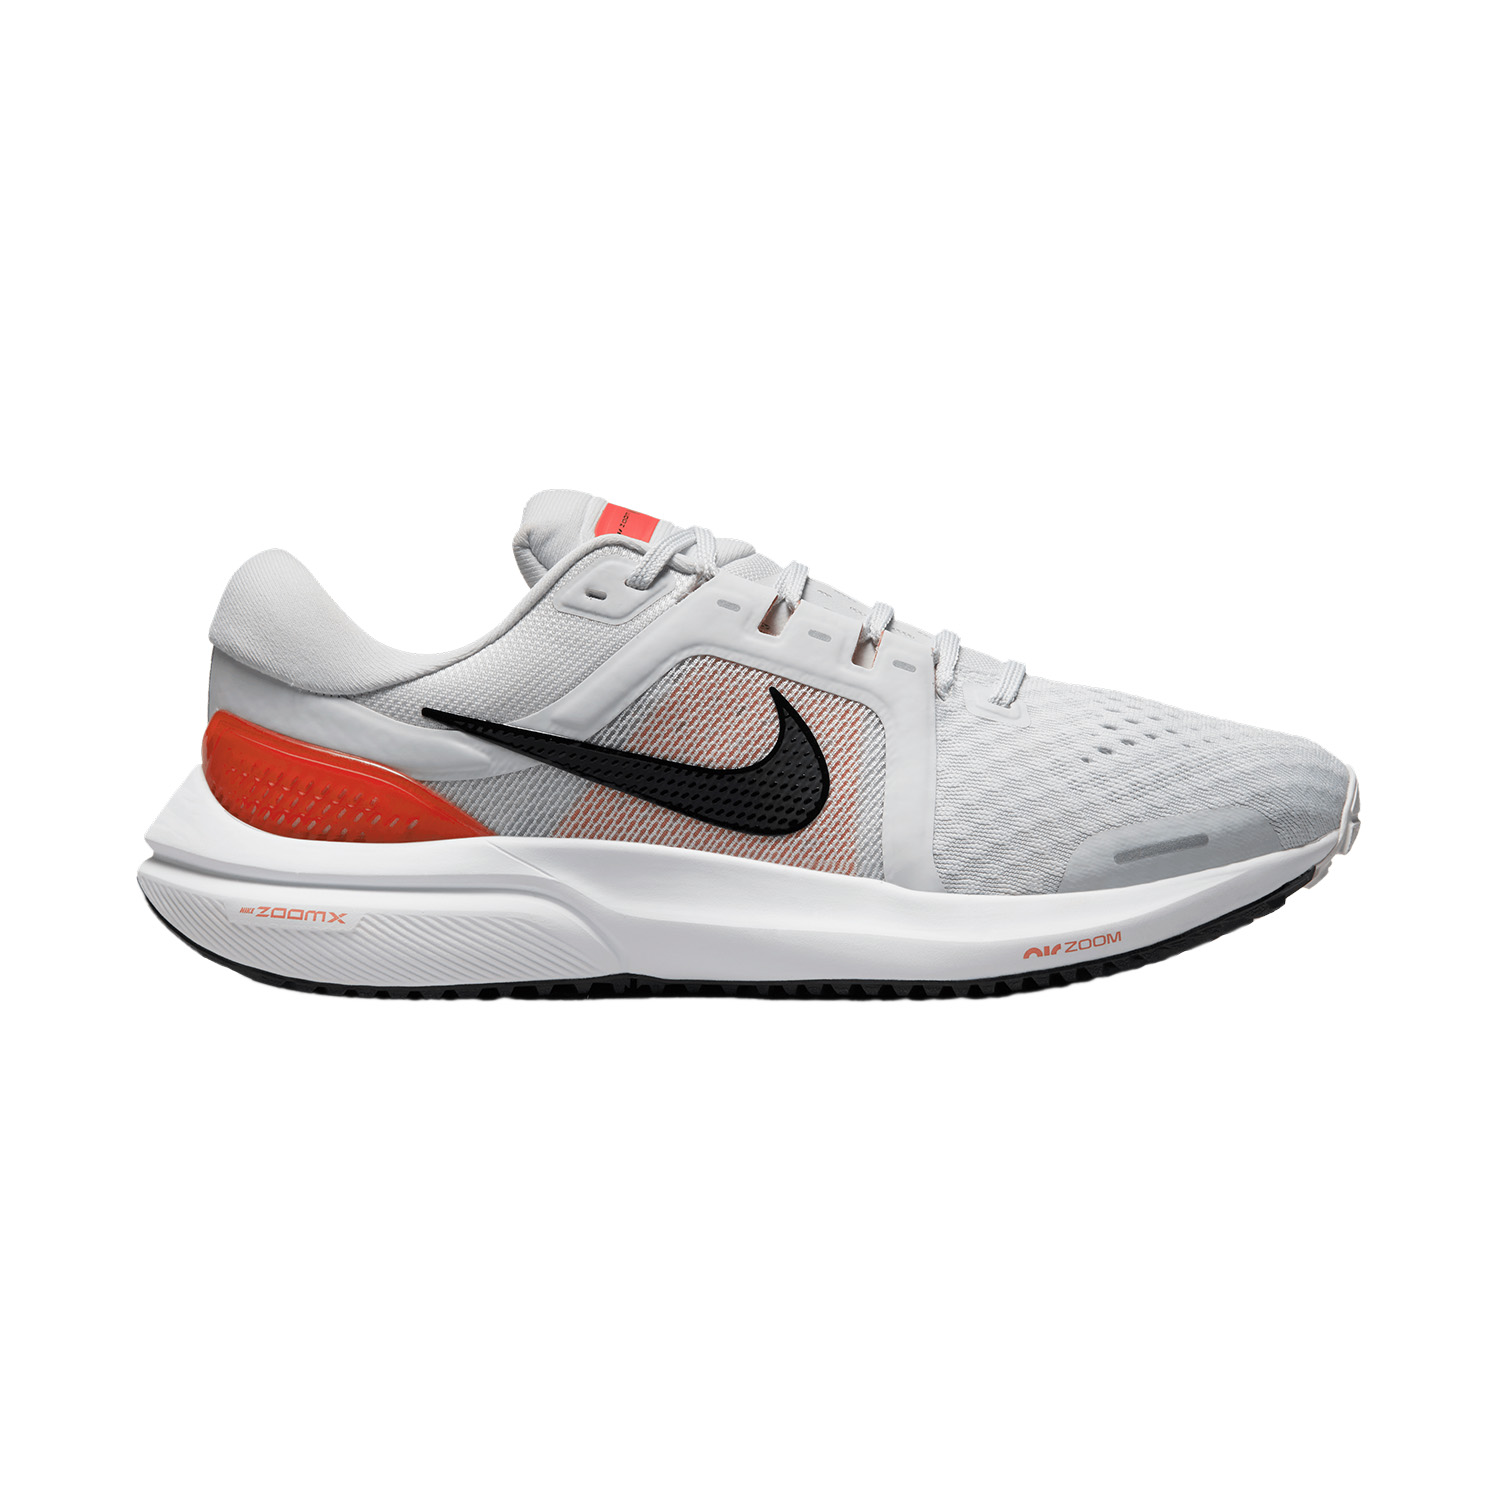 Nike Air Zoom Vomero 16 Men's Running Shoes - Photon Dust